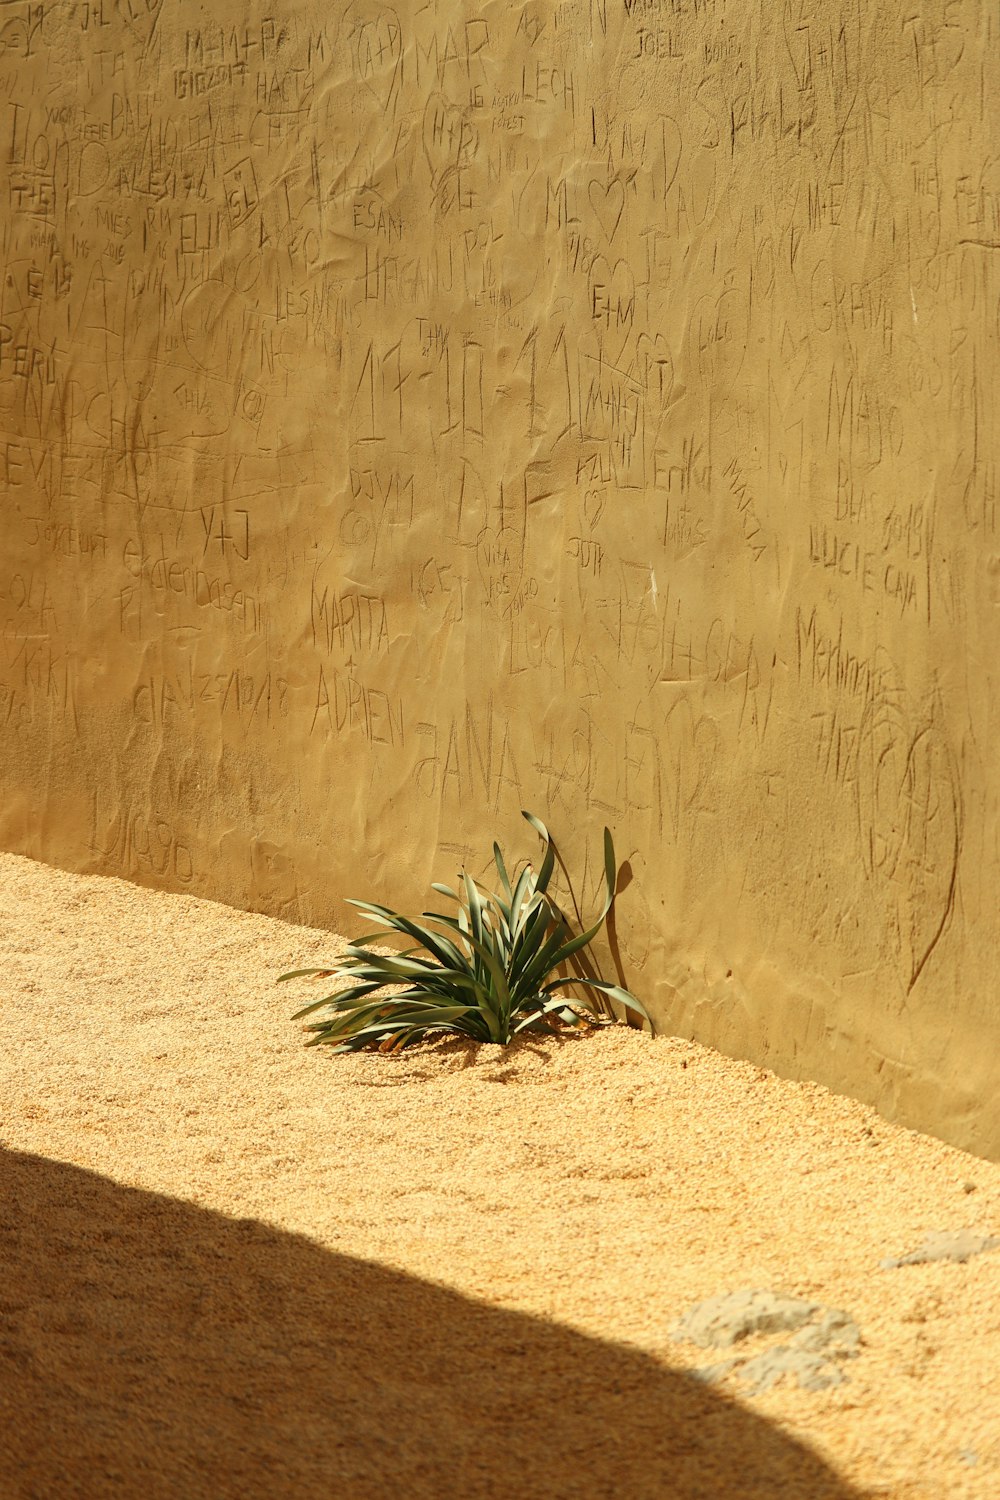 a plant in the sand near a wall with writing on it